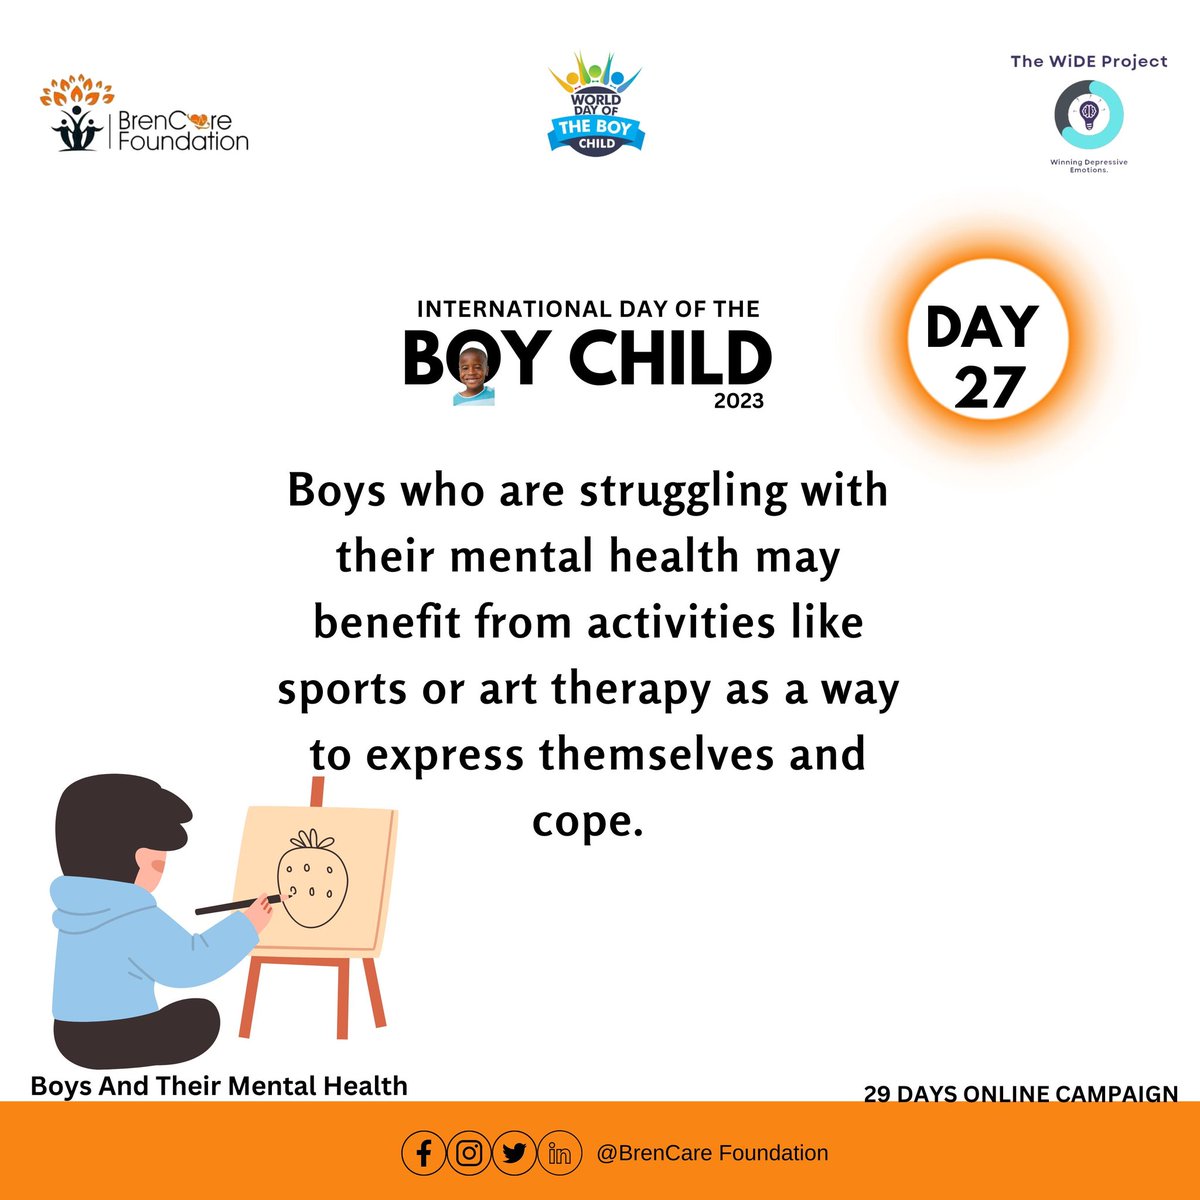 It is not too late to save the boy child!

#Boysmentalhealth
#mentalhealthmatters
#mentalhealthawareness
#Seeksupport